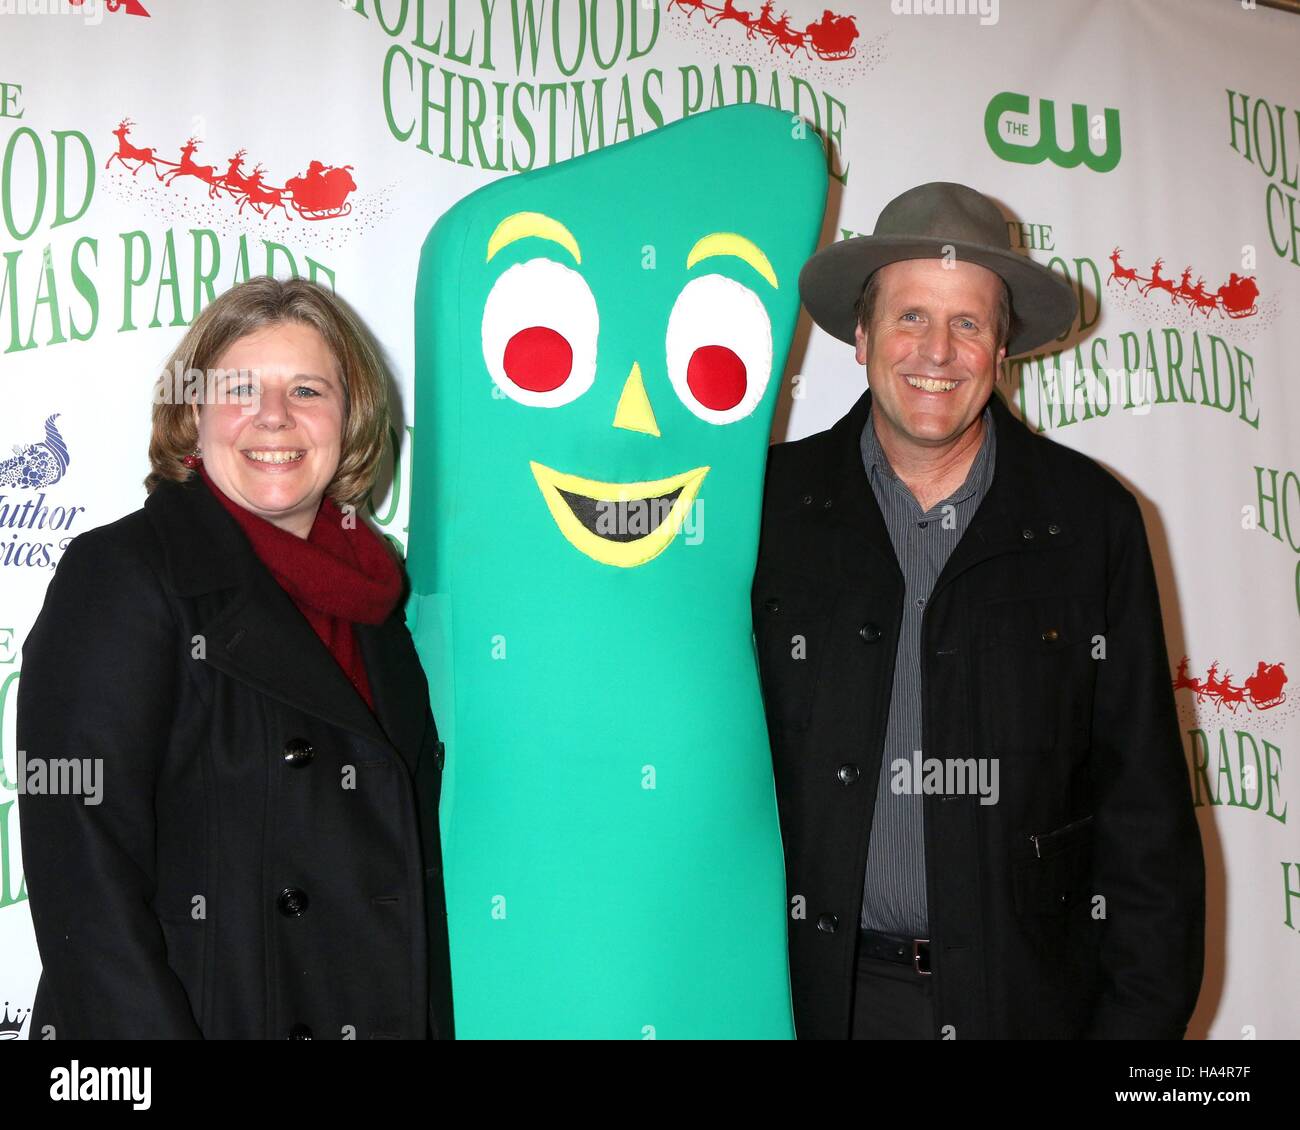 Los Angeles, CA, USA. 27th Nov, 2016. Ann Clokey, Gumby, Joe Clokey in attendance for The 85th Annual Hollywood Christmas Parade, Hollywood Boulevard, Los Angeles, CA November 27, 2016. Credit:  Priscilla Grant/Everett Collection/Alamy Live News Stock Photo